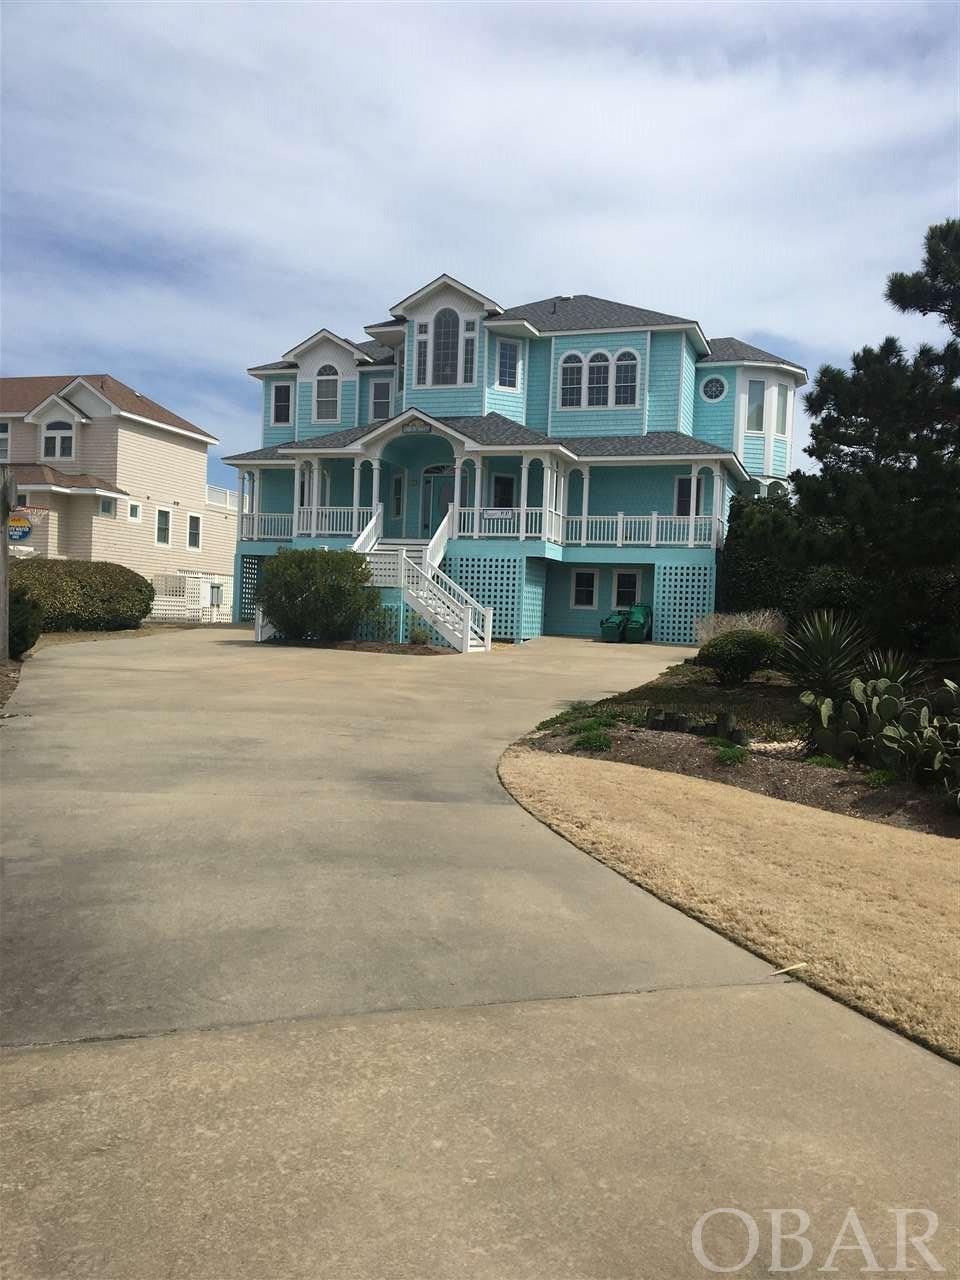 If you are looking for a bright open oceanfront house with a solid double dune line and huge pool area OB Xtasy is for you.  As you enter the house on the mid floor you will be impressed with the curved wood staircase that leads to the upper level.  The great room features a fireplace, wetbar with an icemaker and custom built in cabinets.   The gourmet kitchen has double ovens, gas cooktop, double dishwashers that were replaced in 2021 and a large island.  The south facing tower area holds the breakfast nook with windows on 3 sides. There is a large master bedroom with a huge walk in closet  master bath with ceramic shower and jacuzzi tub.  Overlooking the living area is a loft for reading or just watching the waves. The mid level has 5 master bedrooms and numerous owner locked closets.The ground floor has a game room  with custom built in cabinets a bunk bedroom, bathroom , separate pool table room, laundry area and a garage. Double outside showers and fun tiki bar lead to the large pool area.  This house has plenty of room to spread out and enjoy life at the OBX. Owners only rent late May till the end of October.